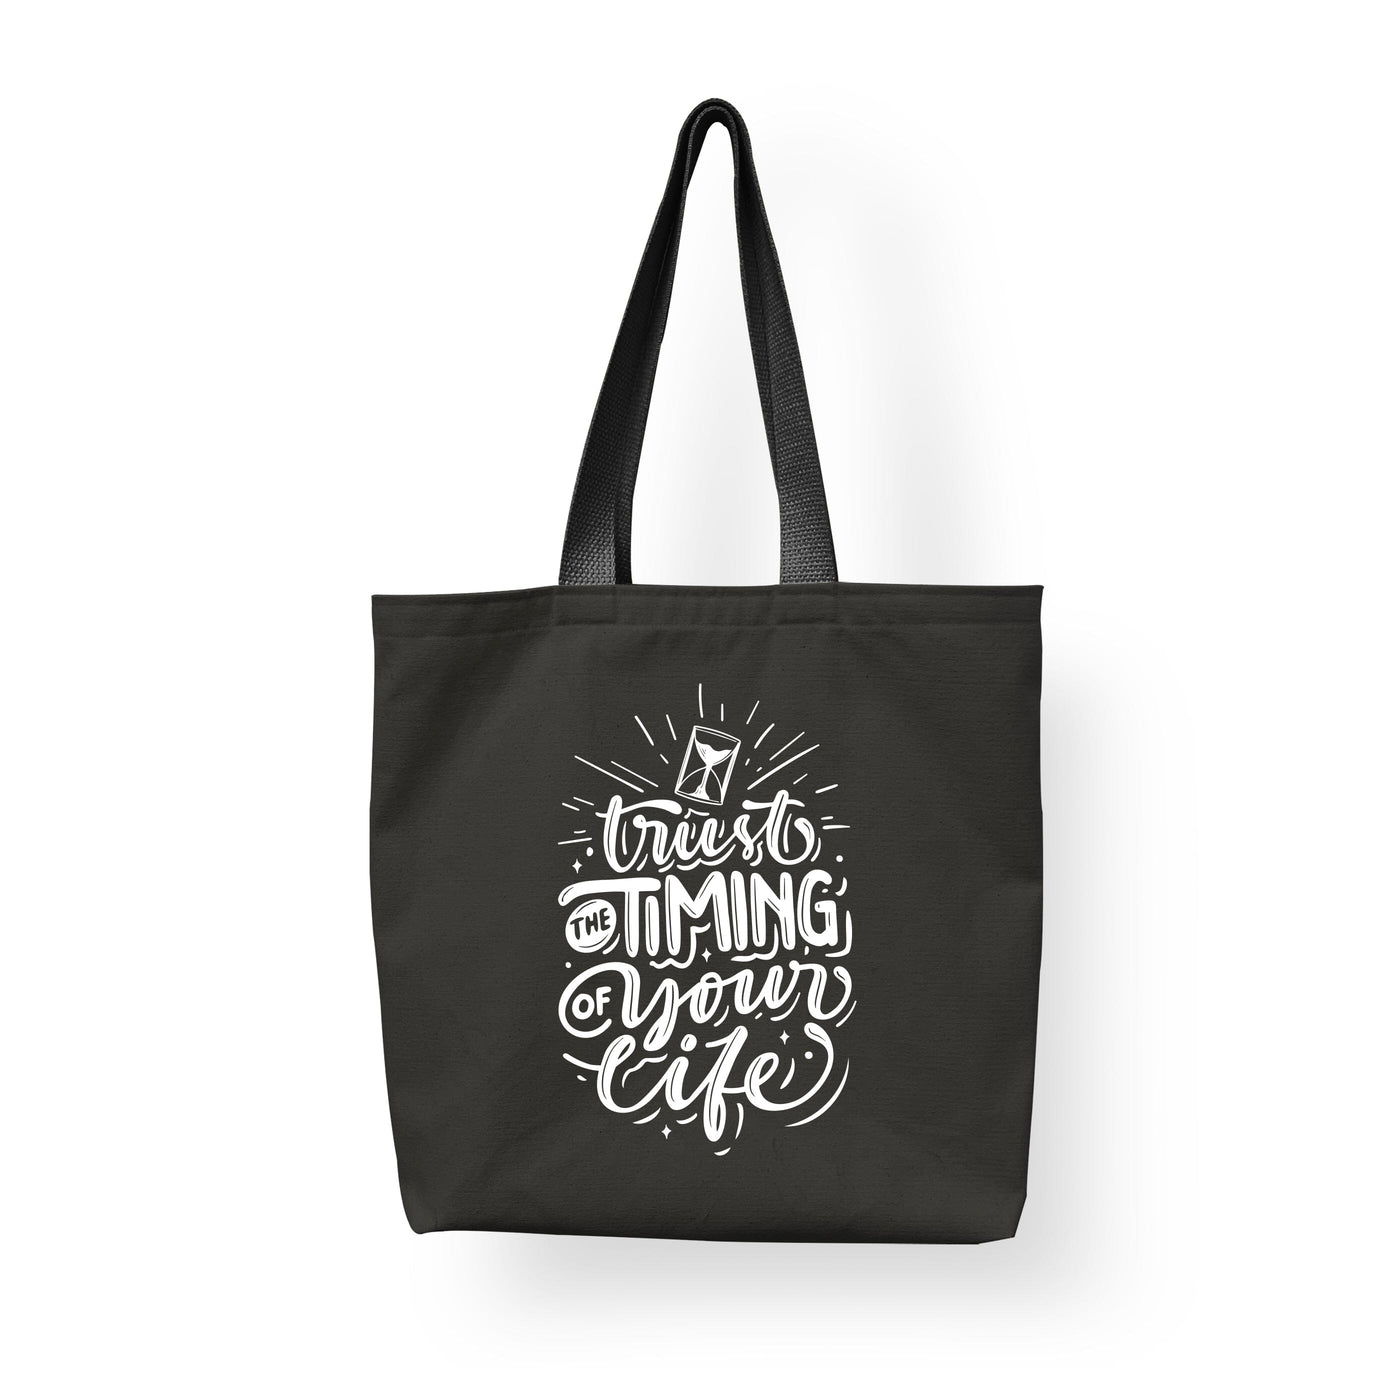 Trust The Timing of Your Life - Cotton Shopping Tote Bag for Eco-Friendly Shoppers, Teacher Bag, Reusable Tote Bag | Sam and Zoey Fashion Tote Apparel & Accessories Sam + Zoey  Sam + Zoey